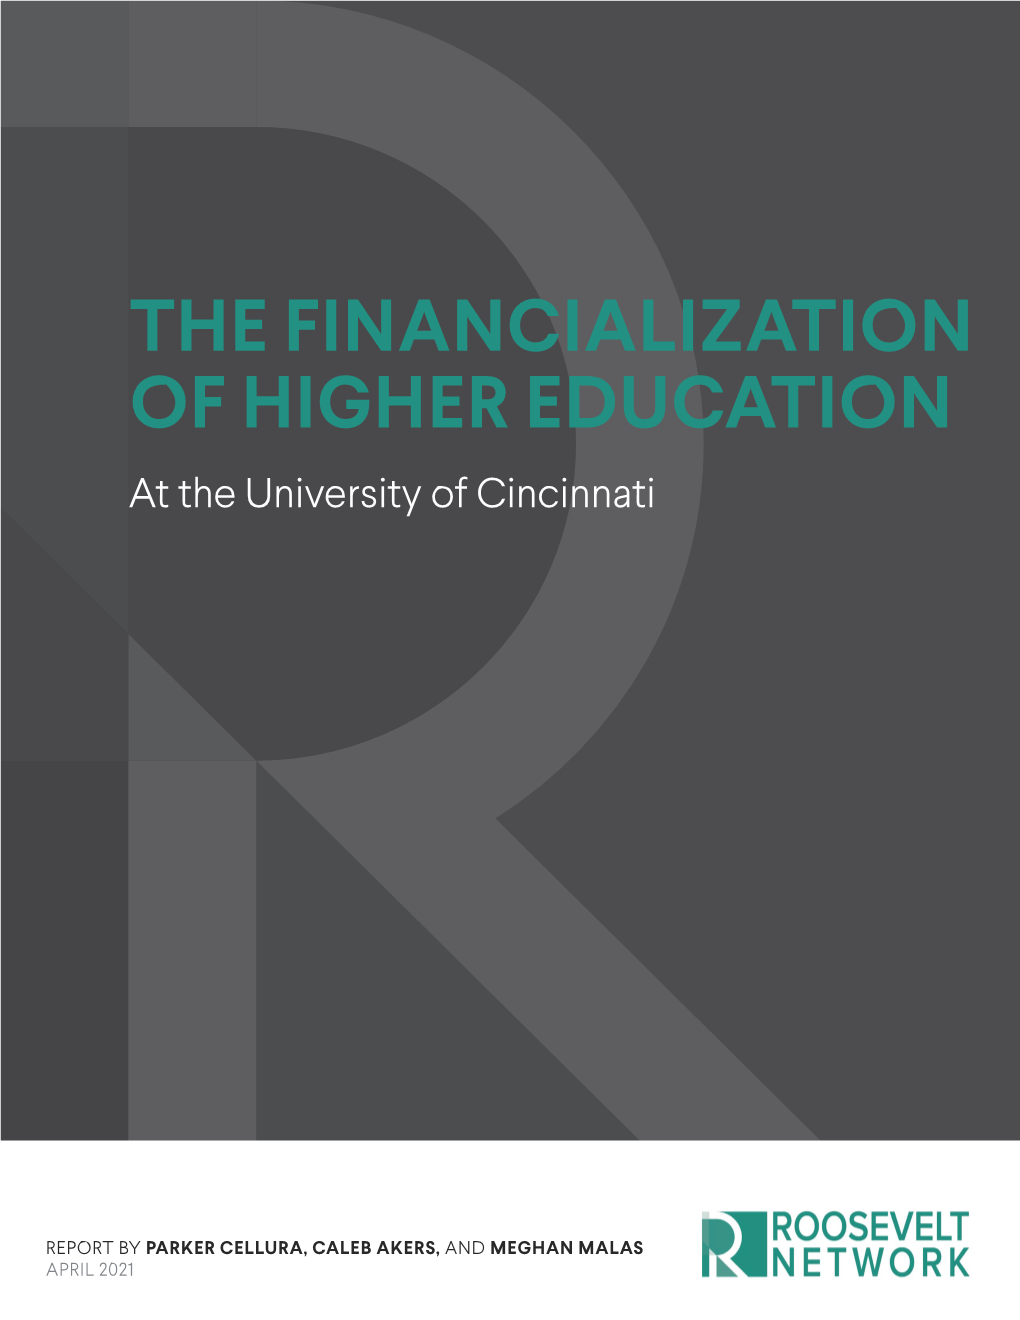 THE FINANCIALIZATION of HIGHER EDUCATION at the University of Cincinnati